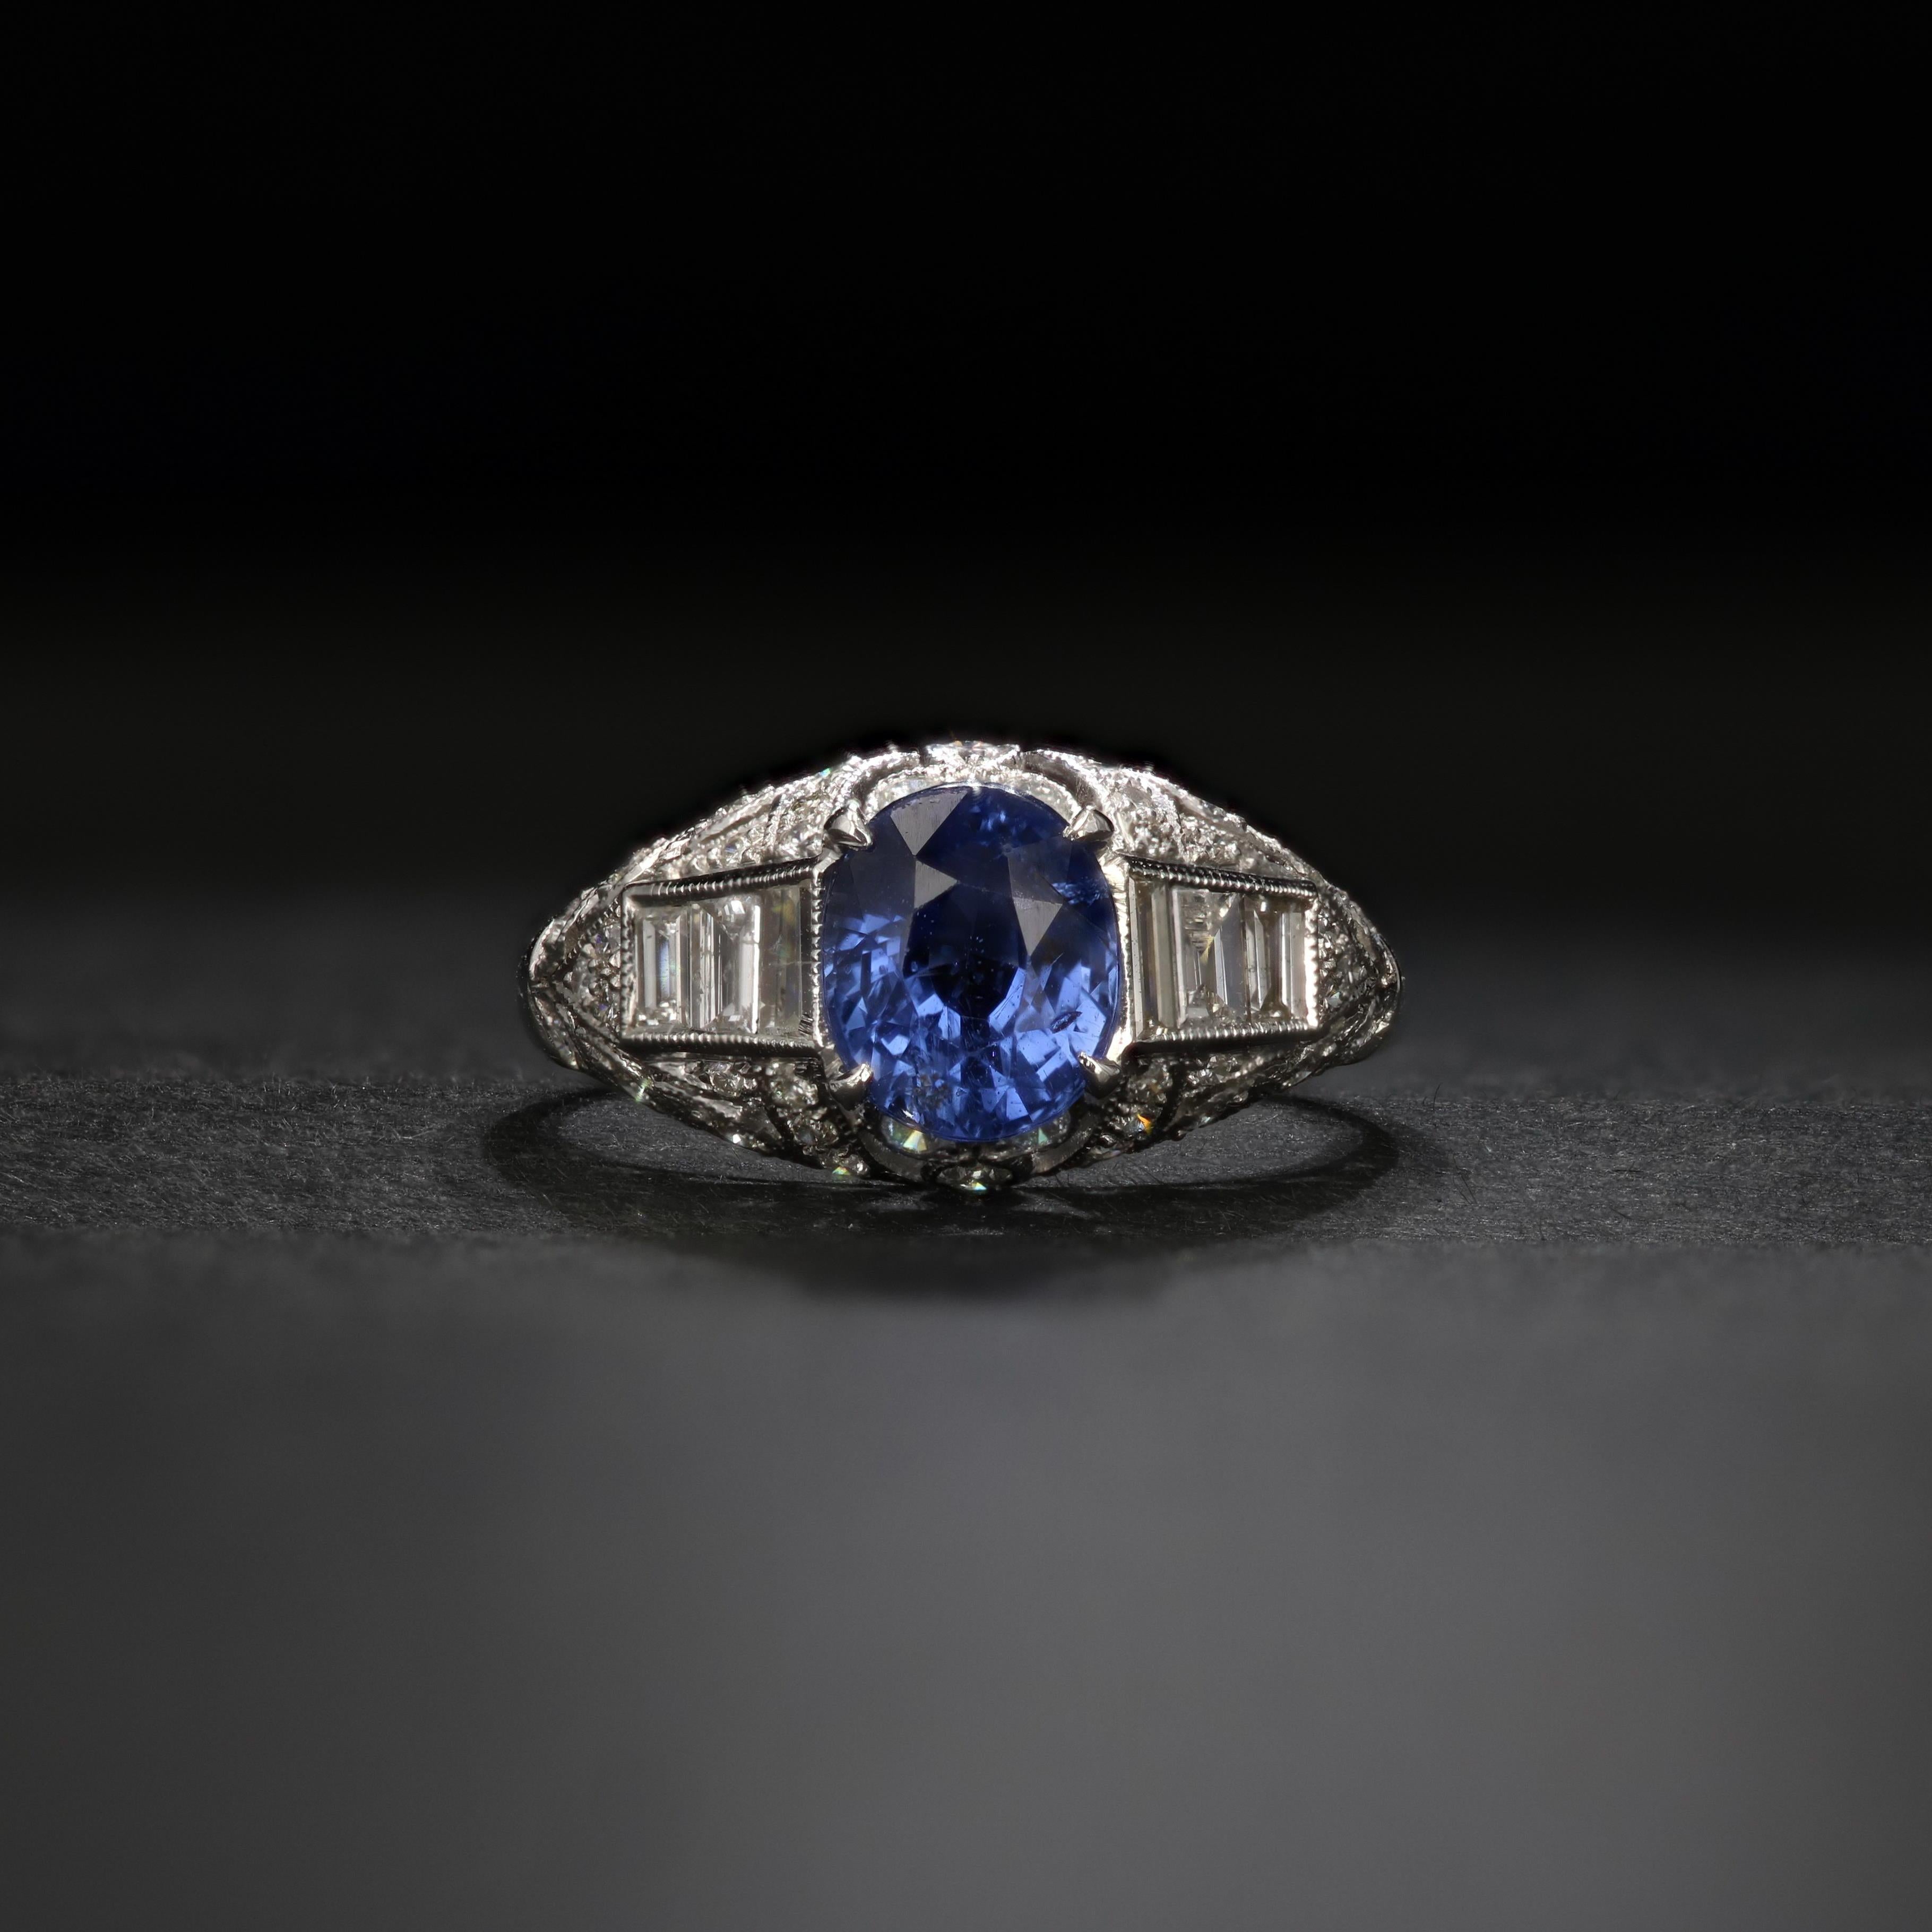 An exquisite Art Deco Style sapphire and diamond ring set in 18k white gold. This ring features an oval sapphire of approximately 2.04 carats. The sapphire is a vivid cornflower blue with excellent clarity. Surrounding the sapphire are approximately